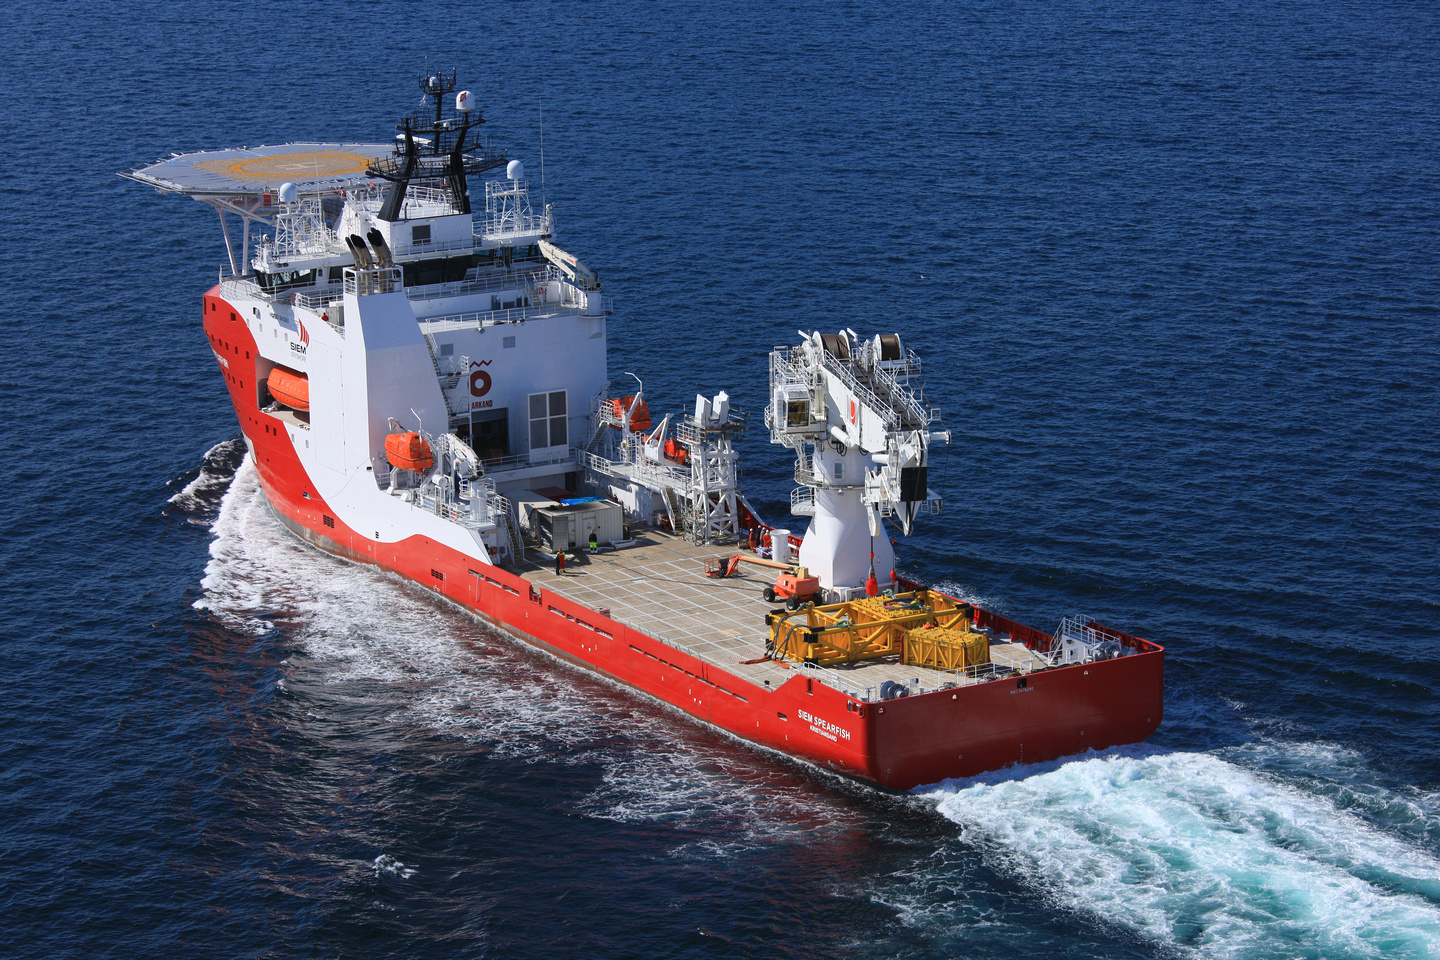 Siem Offshore wins contract award for Siem Spearfish